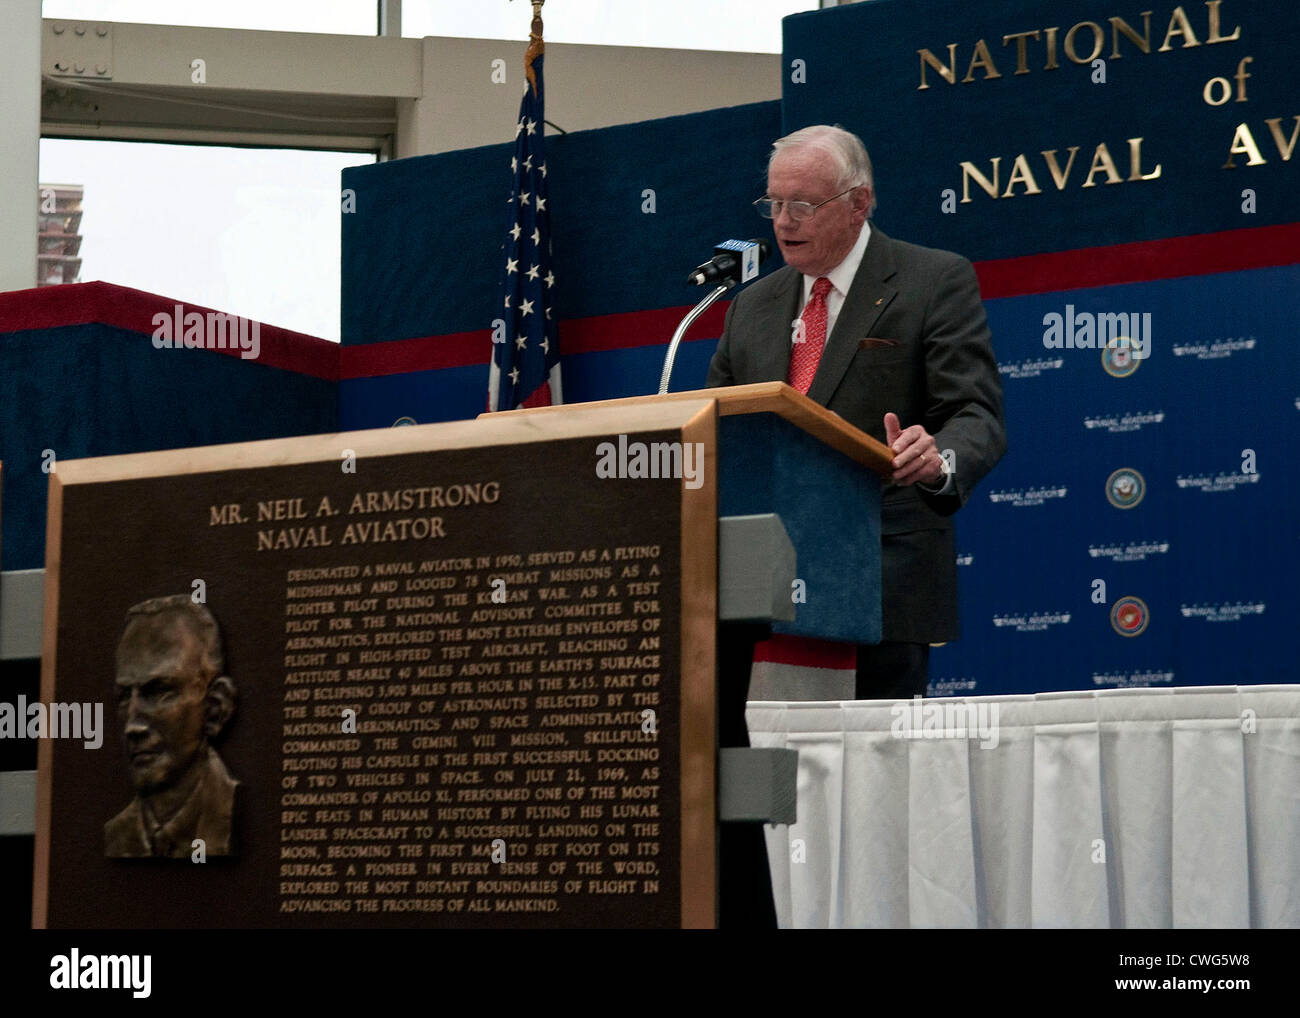 Former astronaut Neil Armstrong gives an acceptance speech after being inducted into the Naval Aviation Hall of Honor at the National Naval Aviation Museum in Pensacola, Fla. The Naval Aviation Hall of Honor was founded in 1979 to recognize individuals who have made extraordinary contributions to Naval Aviation. Armstrong was inducted with retired Vice Adm. William P. Lawrence, retired Marine Corps Lt. Gen. Thomas H. Miller and retired Navy Capt. Richard P. Bordone. Stock Photo